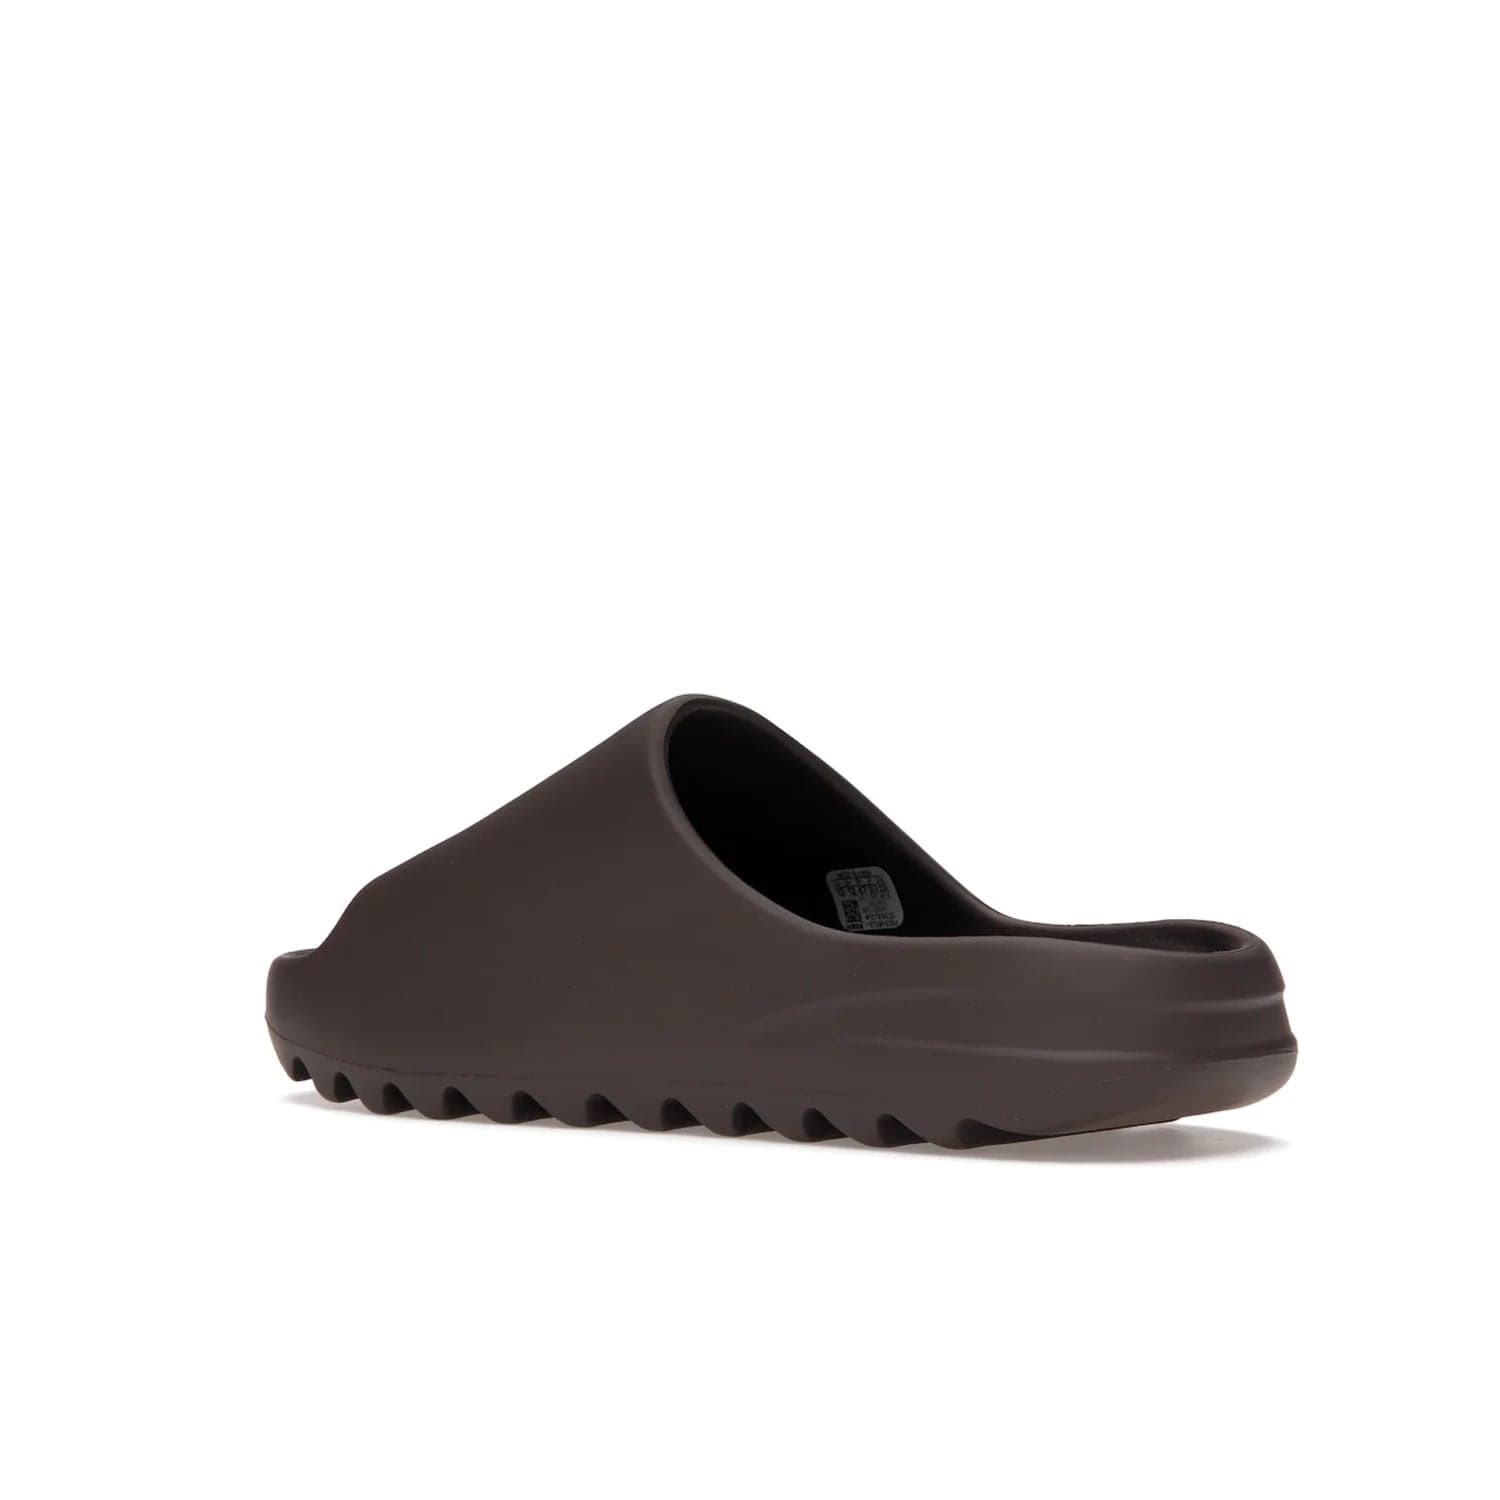 adidas Yeezy Slide Soot - Image 23 - Only at www.BallersClubKickz.com - Shop the Yeezy Slide Soot sneaker by Adidas, a sleek blend of form and function. Monochrome silhouette in Soot/Soot/Soot. Lightweight EVA foam offers comfort and durability. Get the must-have style today.